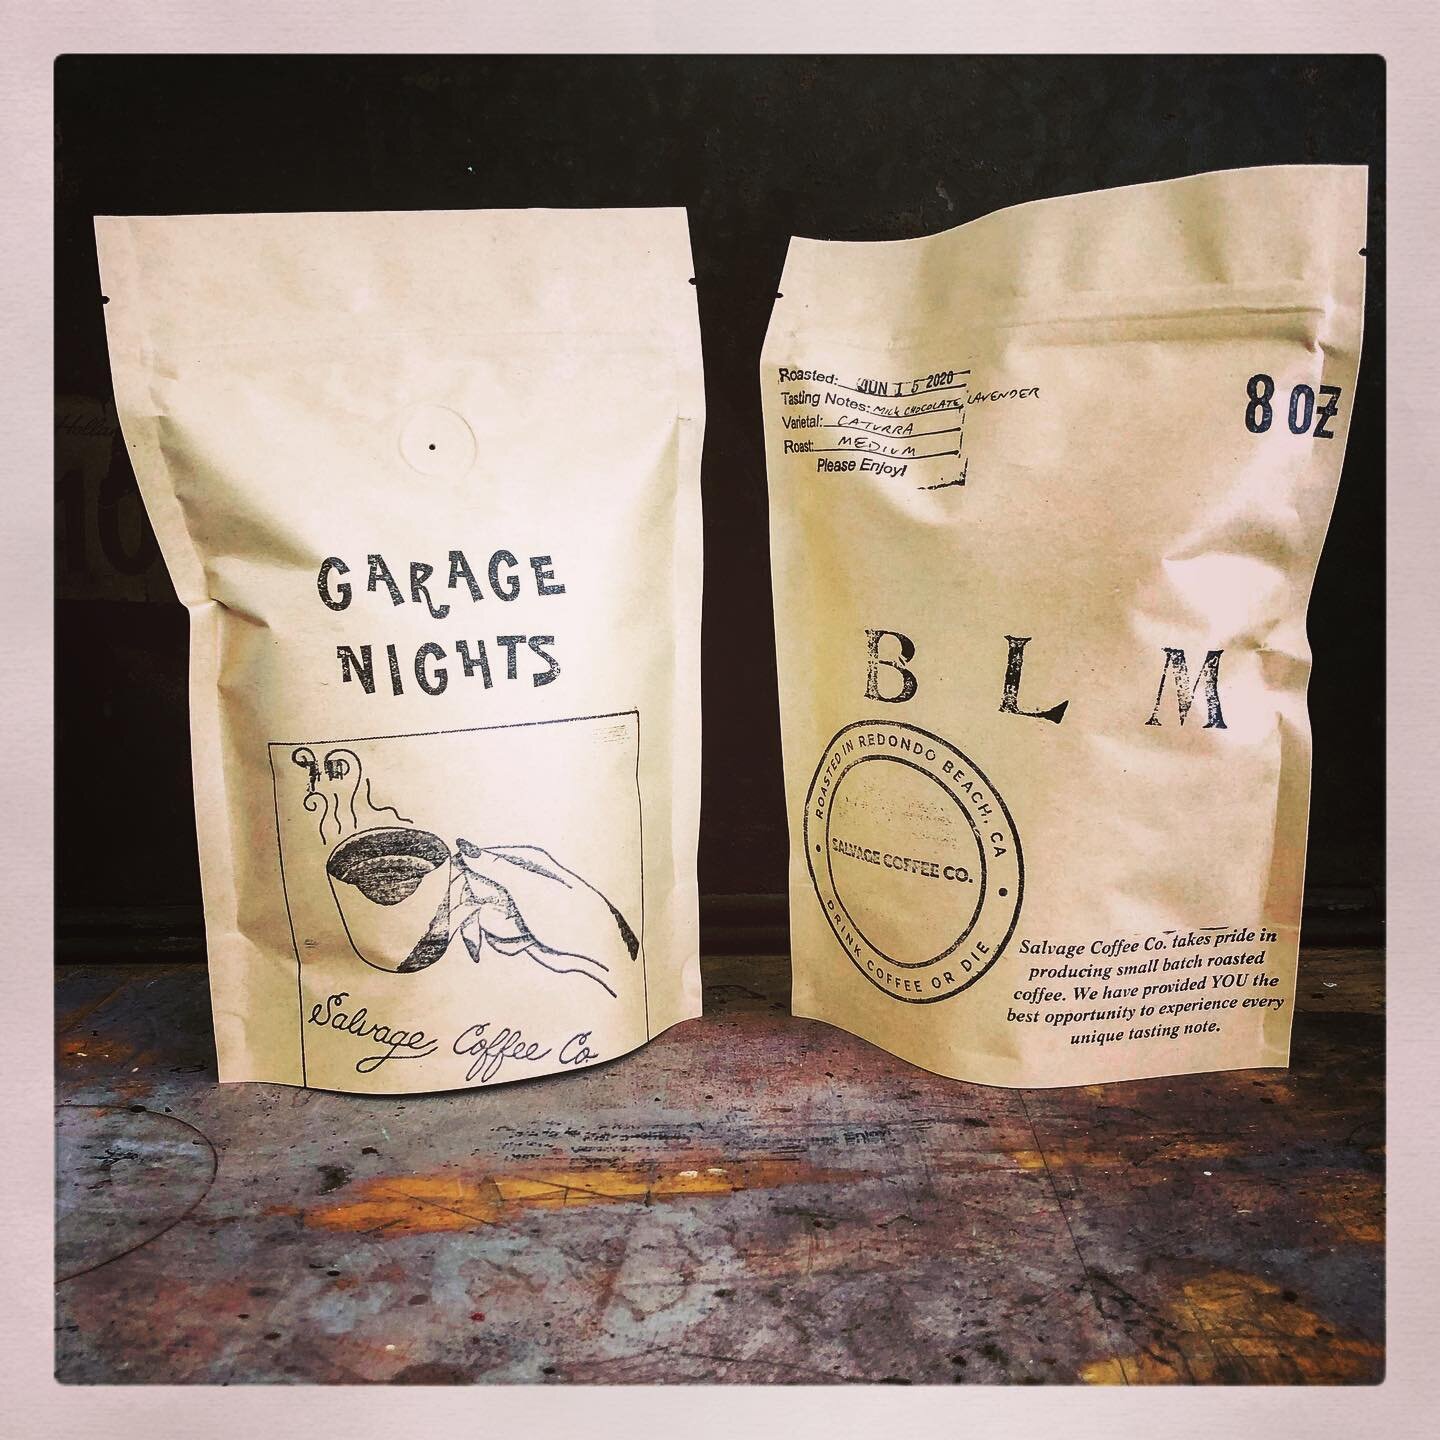 All profits from the purchases of the &ldquo;GARAGE NIGHTS&rdquo; roast will be used as donations for @blklivesmatter ! Let&rsquo;s make a change NOW! #blacklivesmatter #coffee